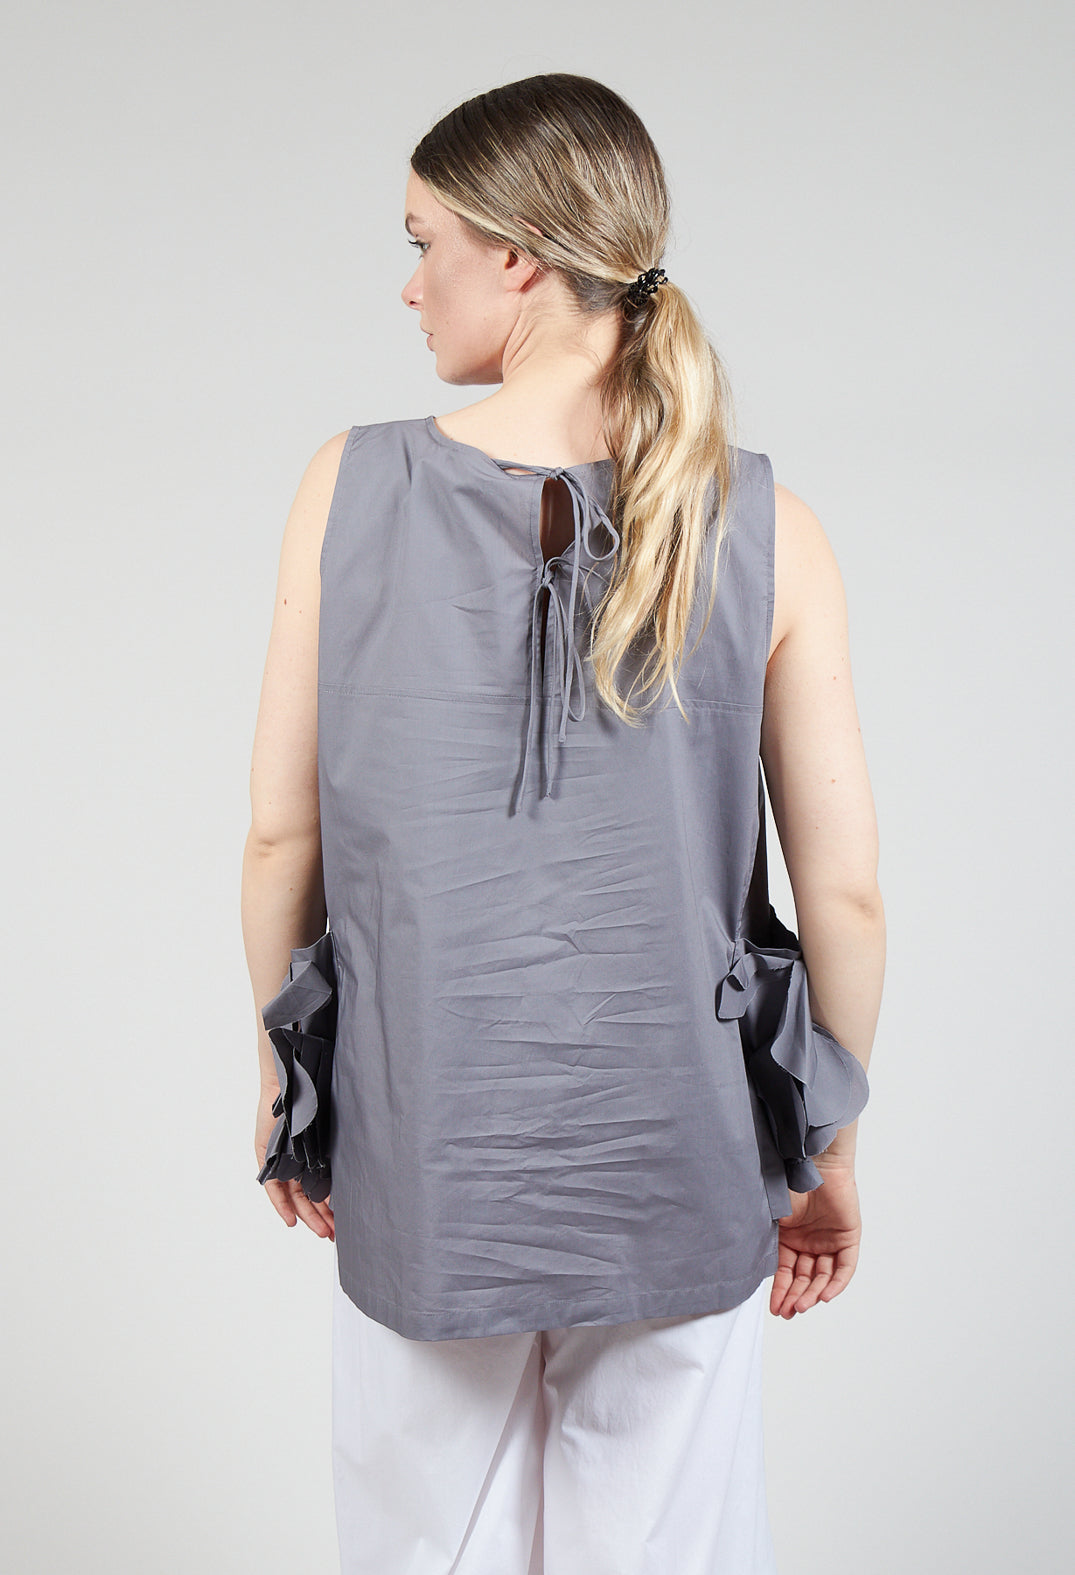 Sleeveless Top with Side Frill Feature in Grey Purple